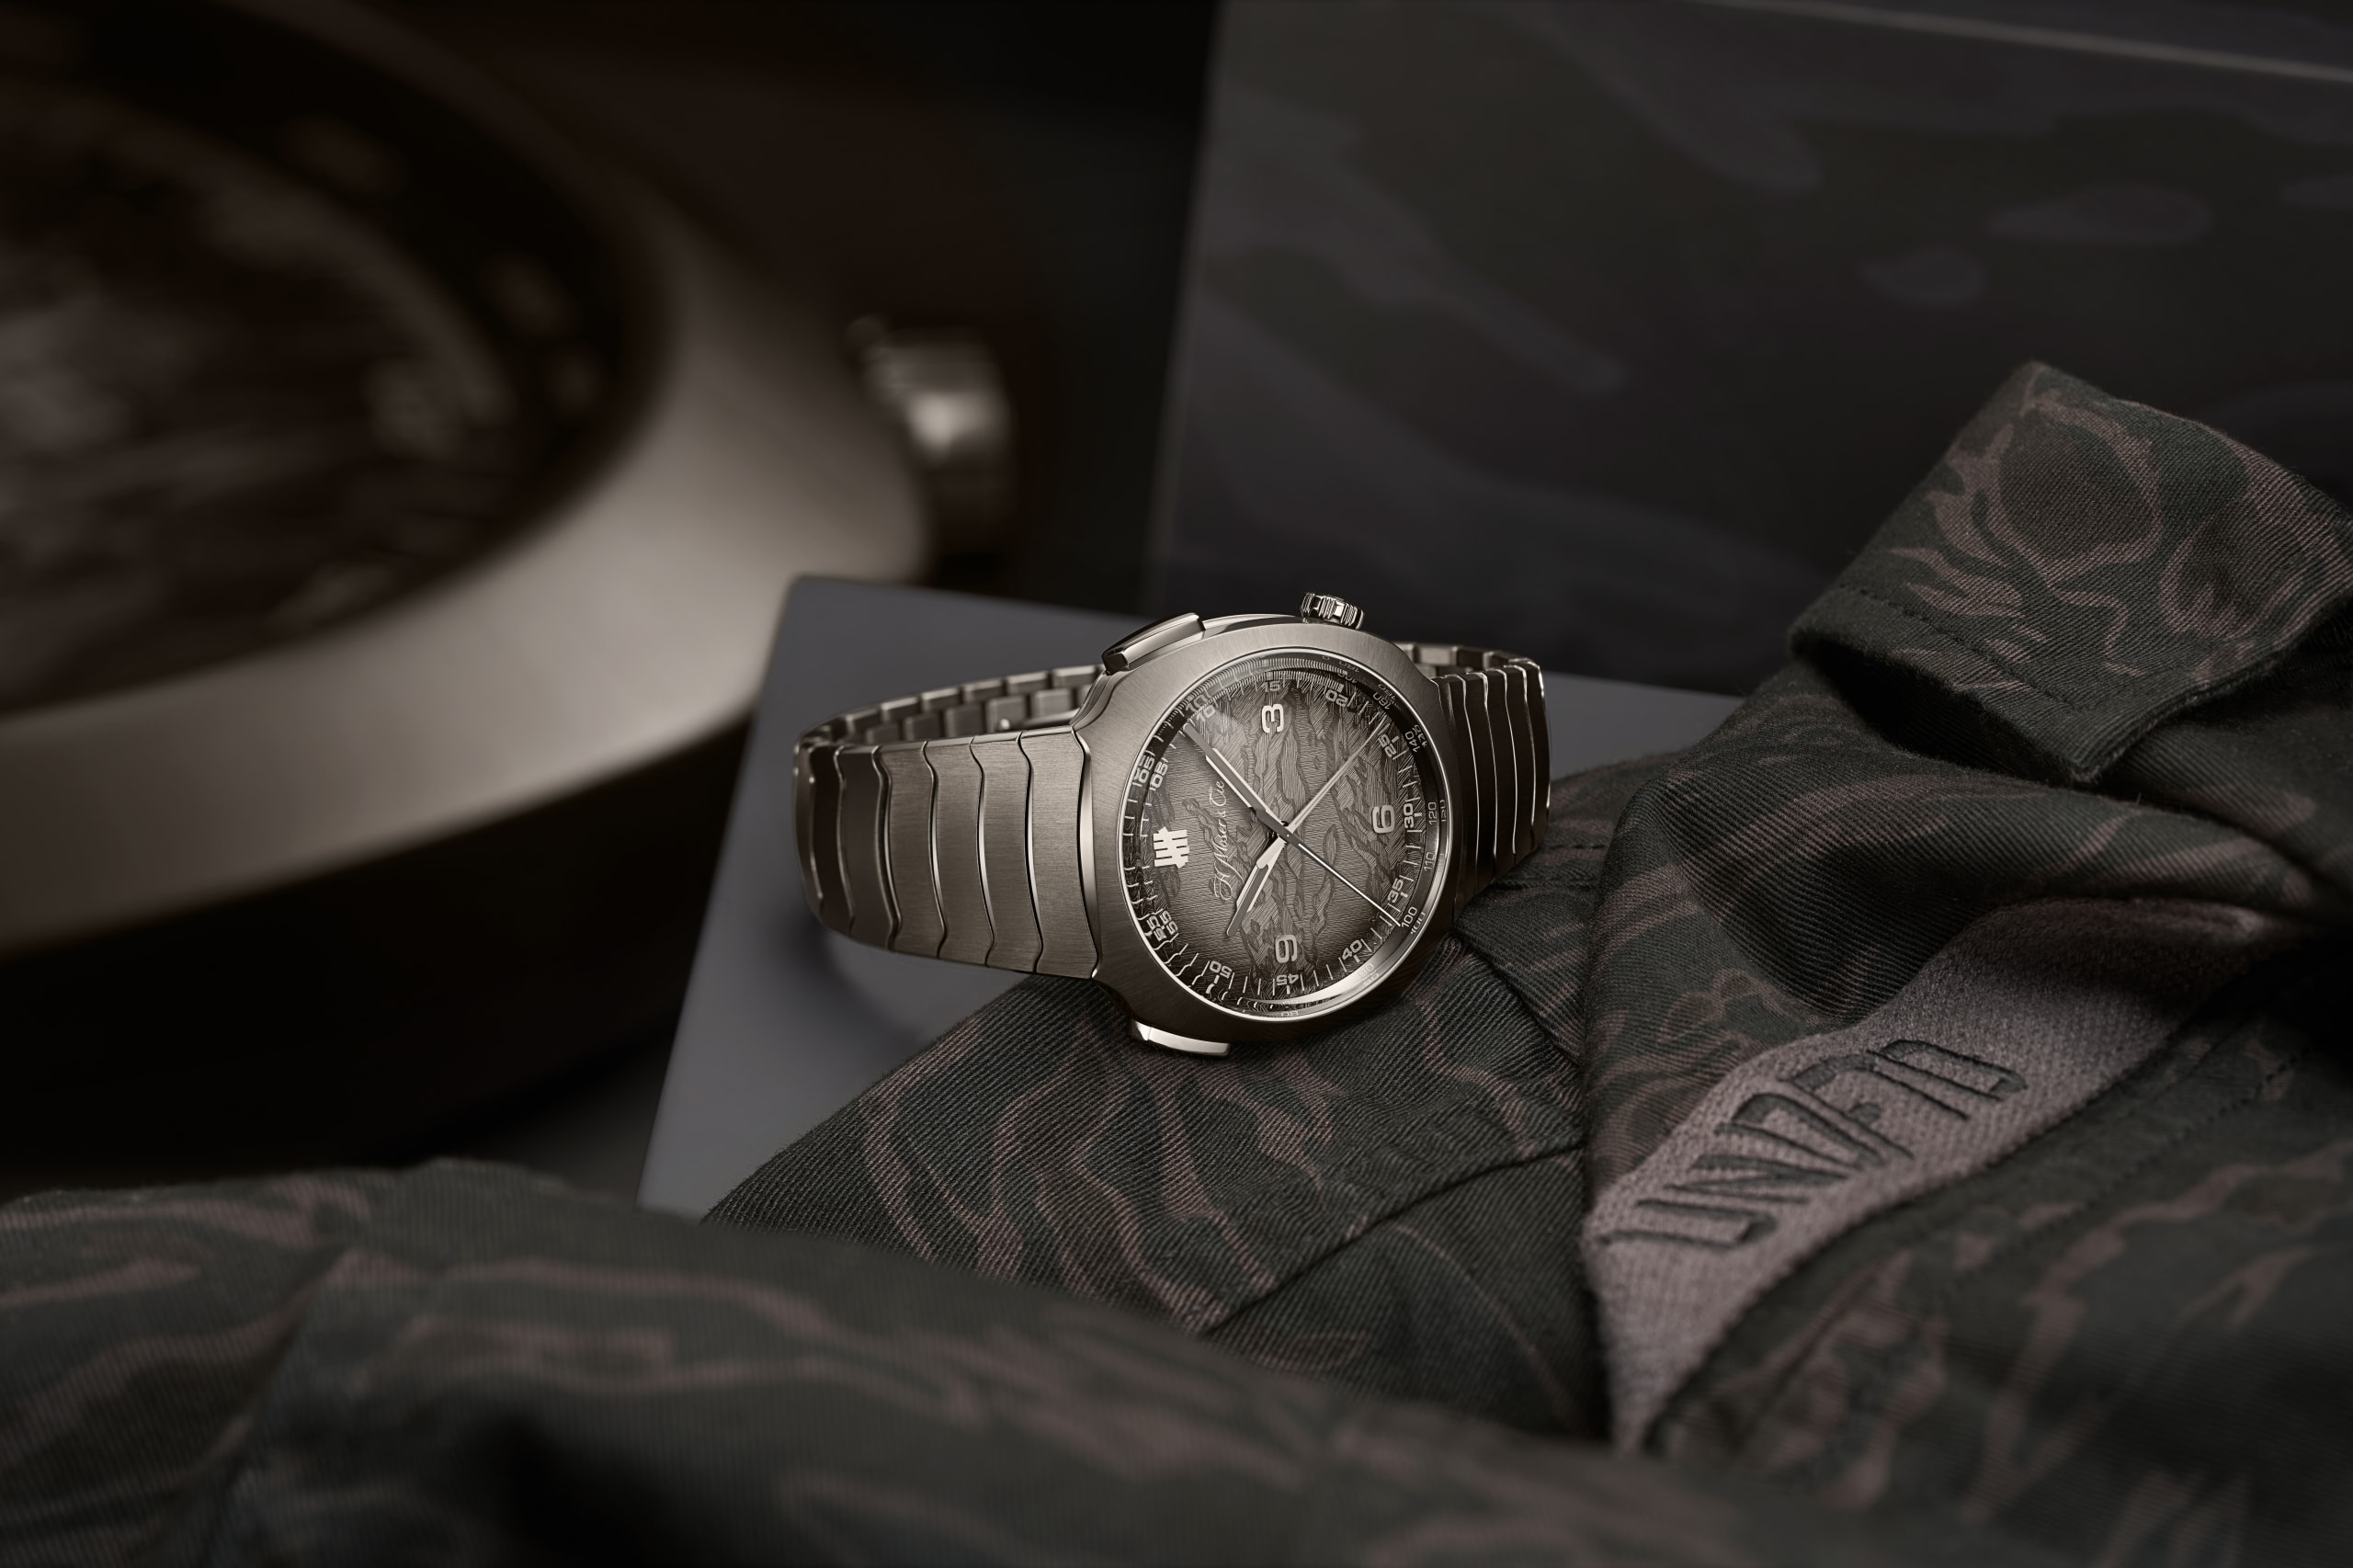 Moser Adds DLC Coating And Engraved Dial To Streamliner Chronograph For Limited Edition